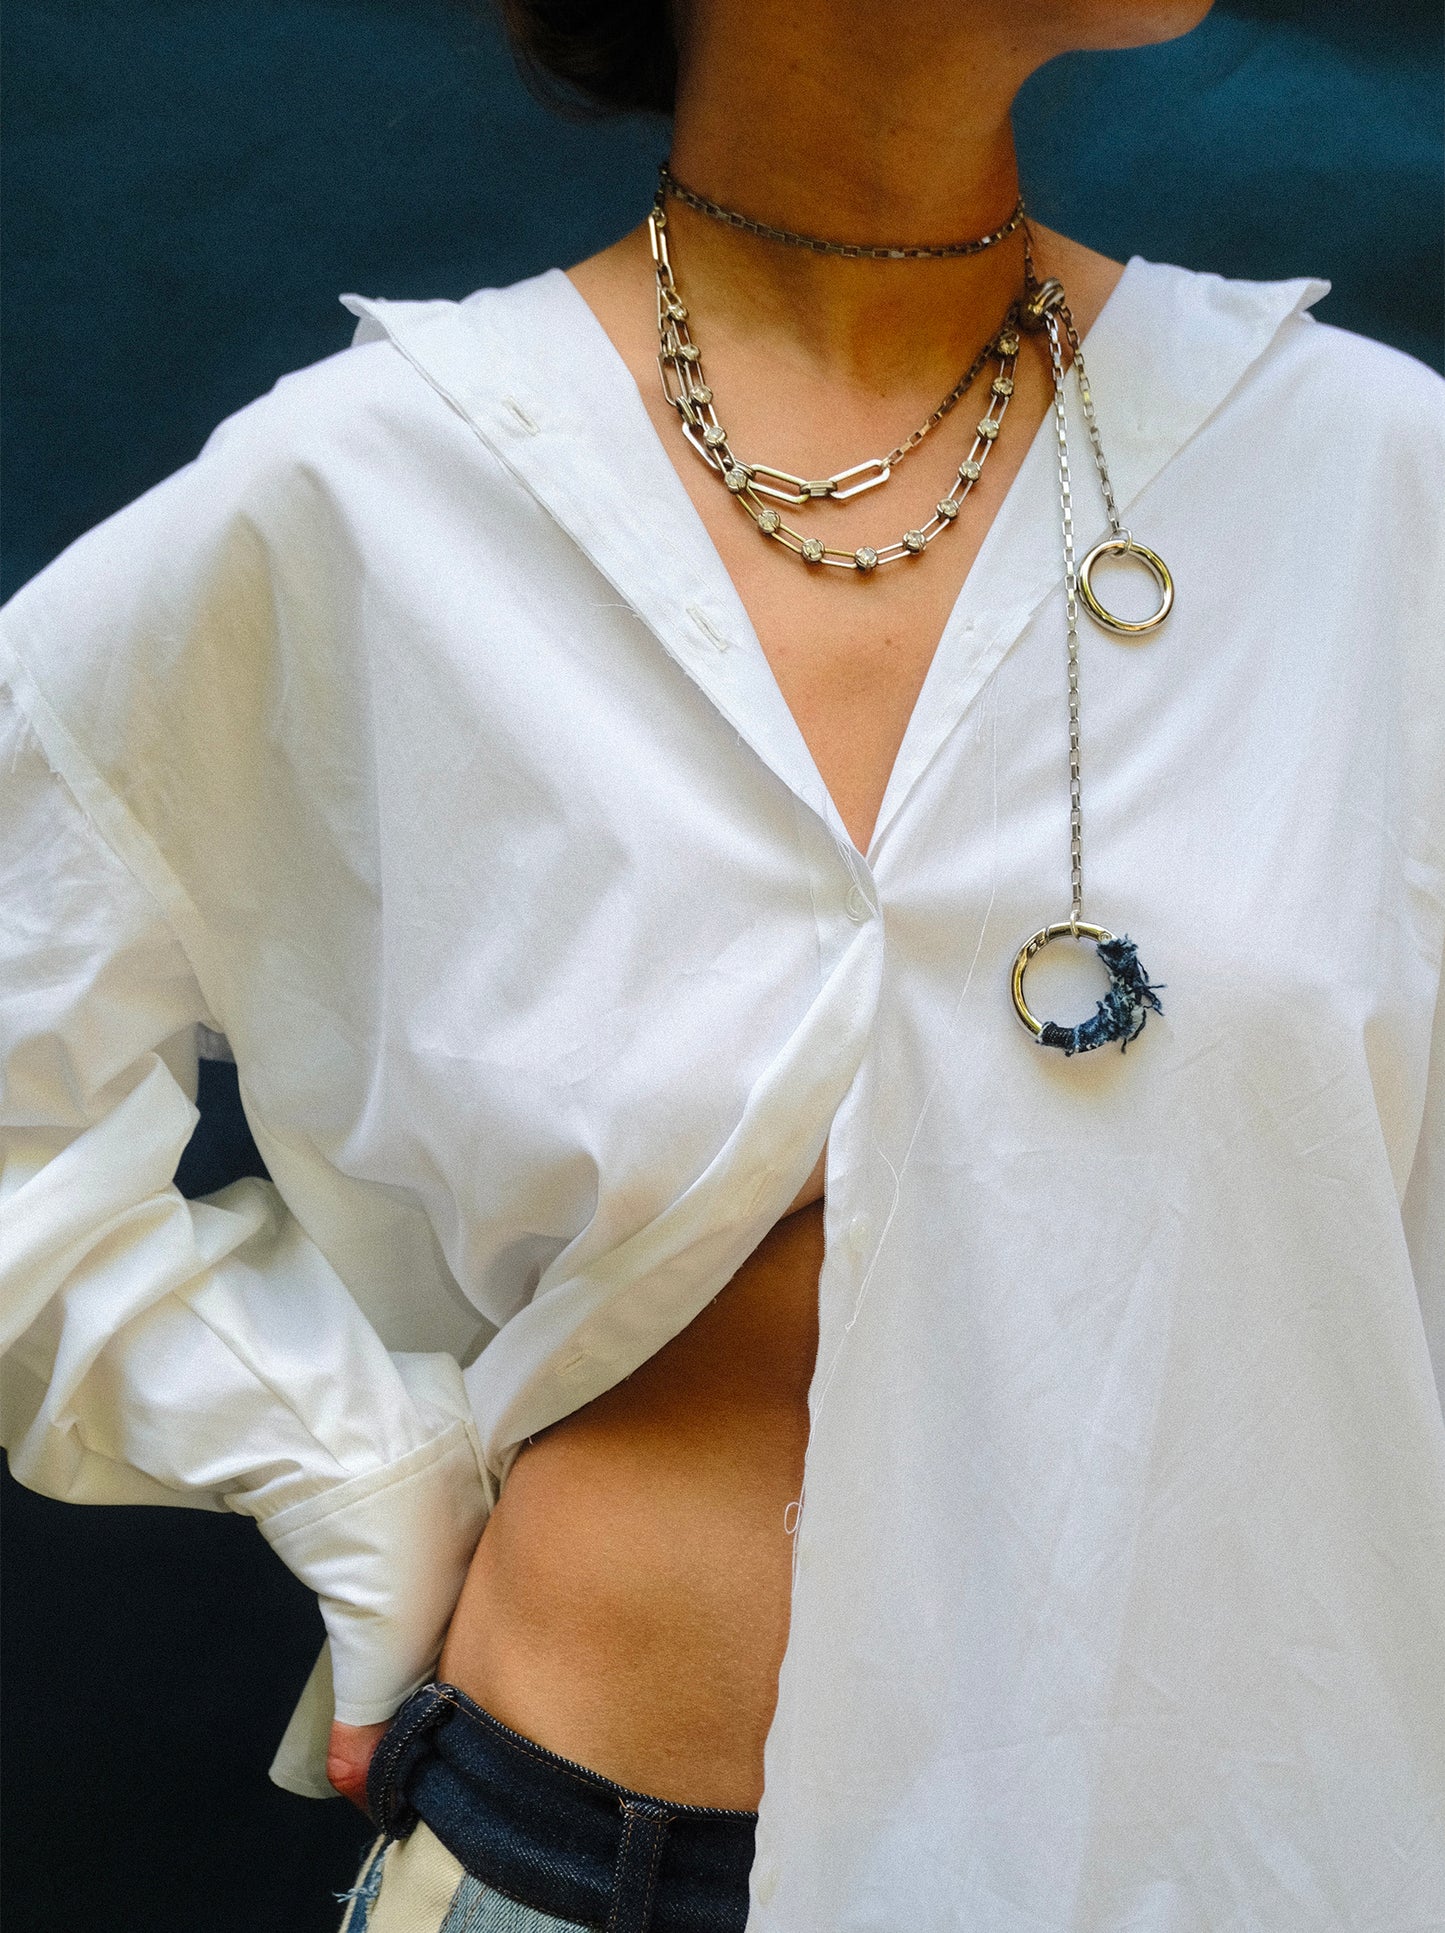 Belly Chain & Tie Necklace